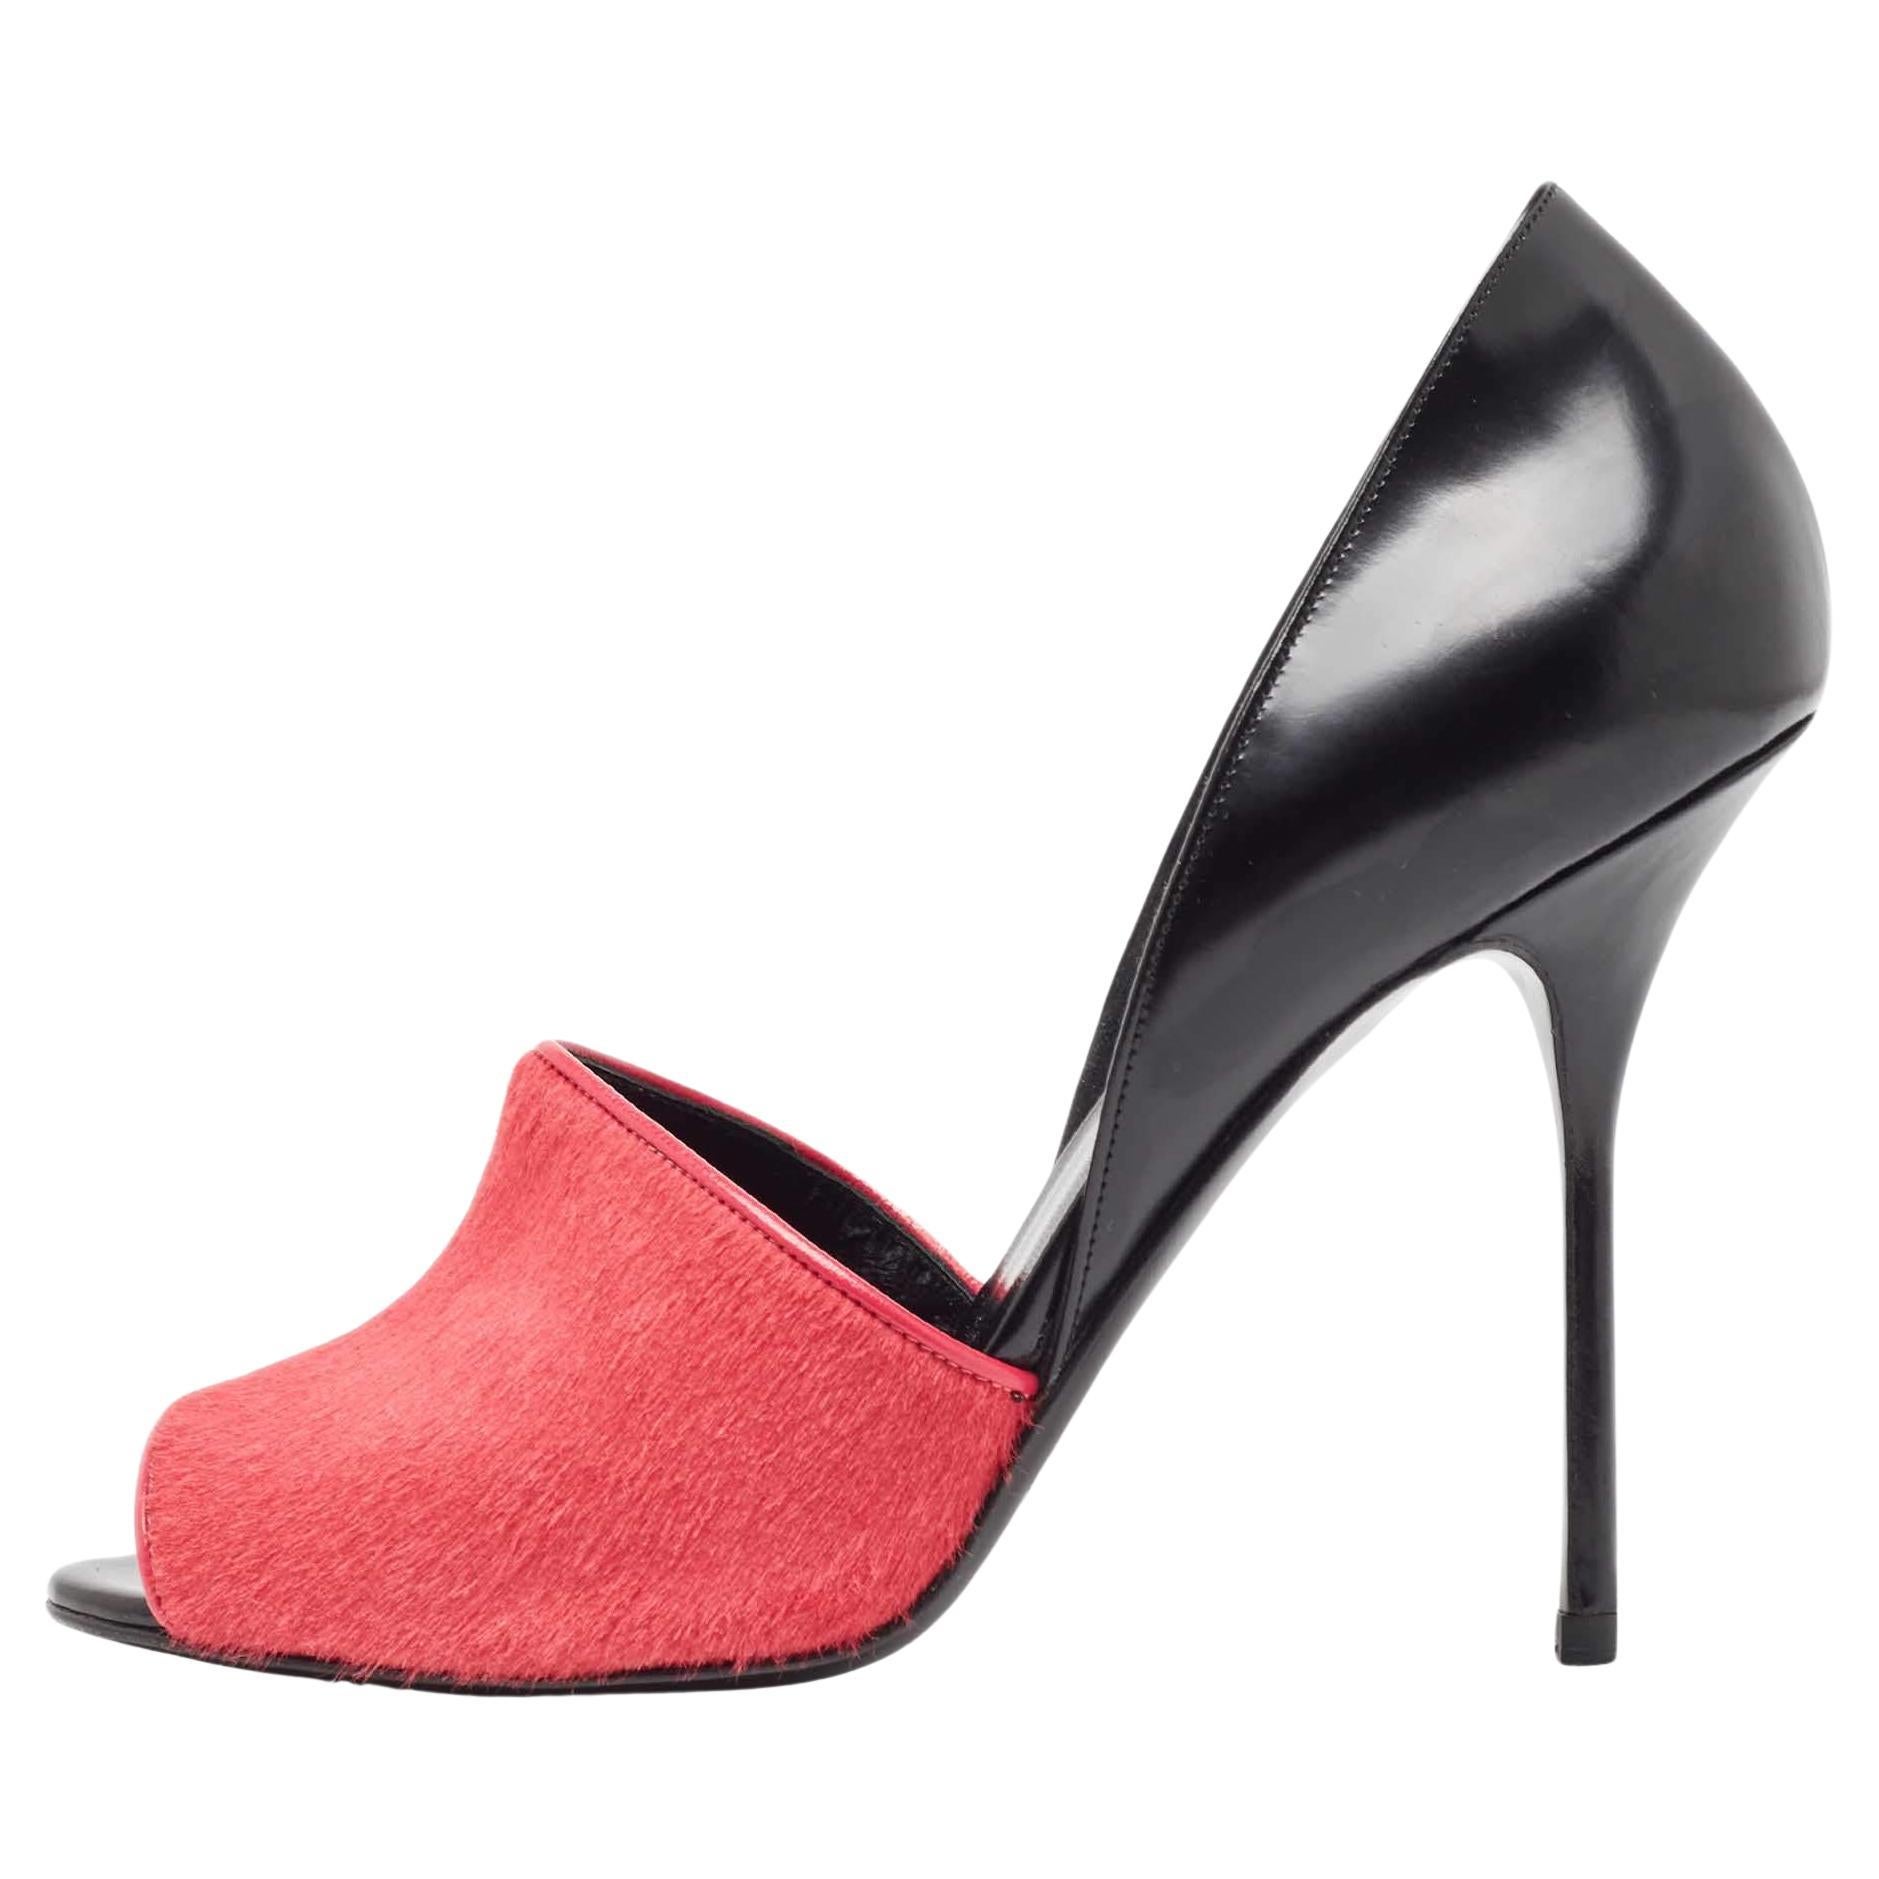 Pierre Hardy Black/Pink Calf Hair Leather and Calf Hair Open Toe Pumps Size 38 For Sale